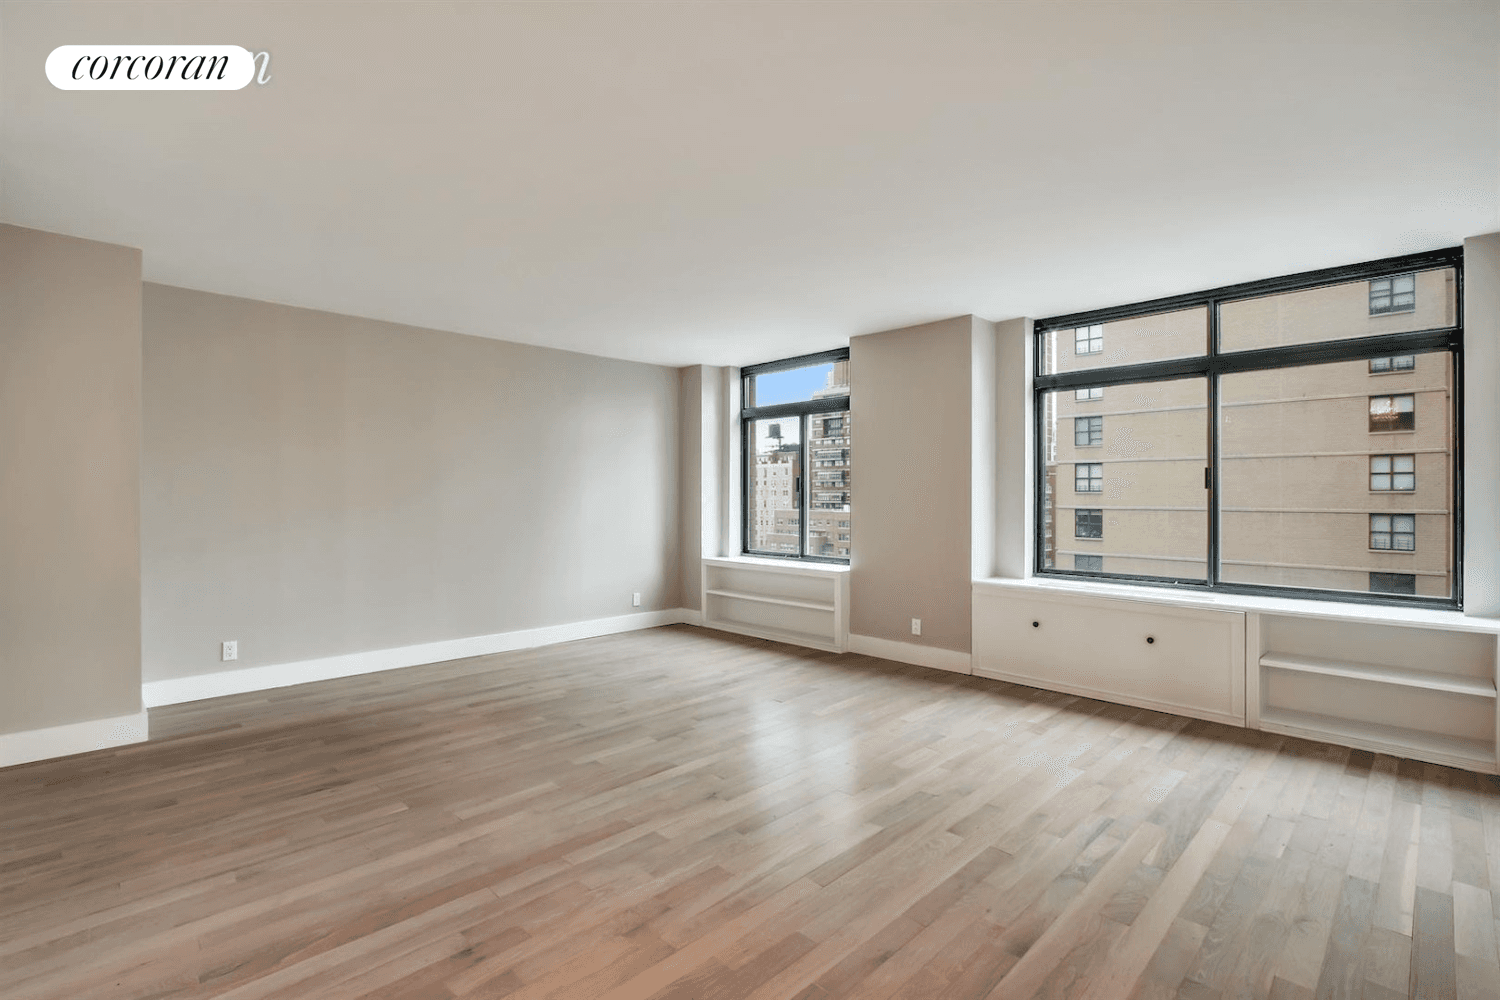 Big and Bright ! This oversized one bedroom rental at the Kingsley Condominium has it all ; huge windows, custom closets, a recently renovated kitchen with stainless steel appliances and ...